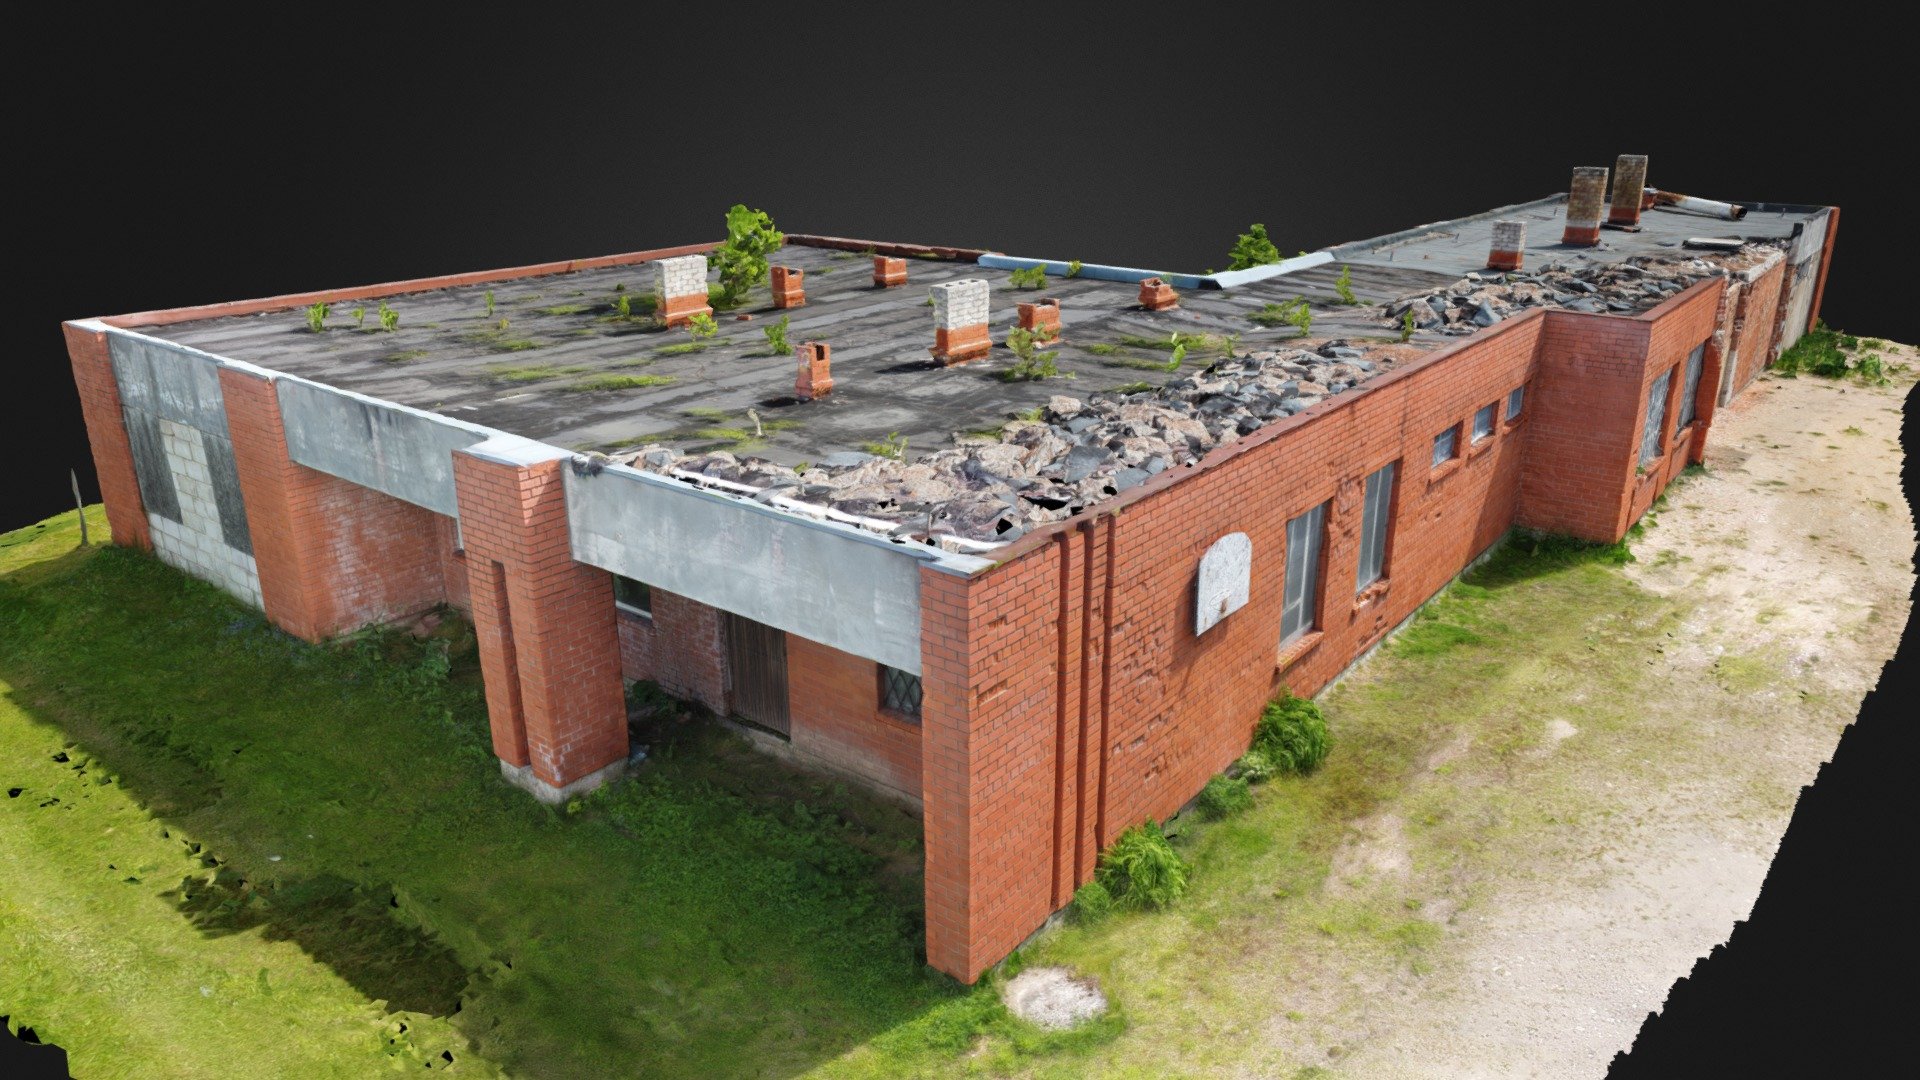 3D scan of an abandoned soviet style brick building.

Broken, partially collapsed roof, red bricks, wooden doors, dirty walls. 

With normal map 3d model